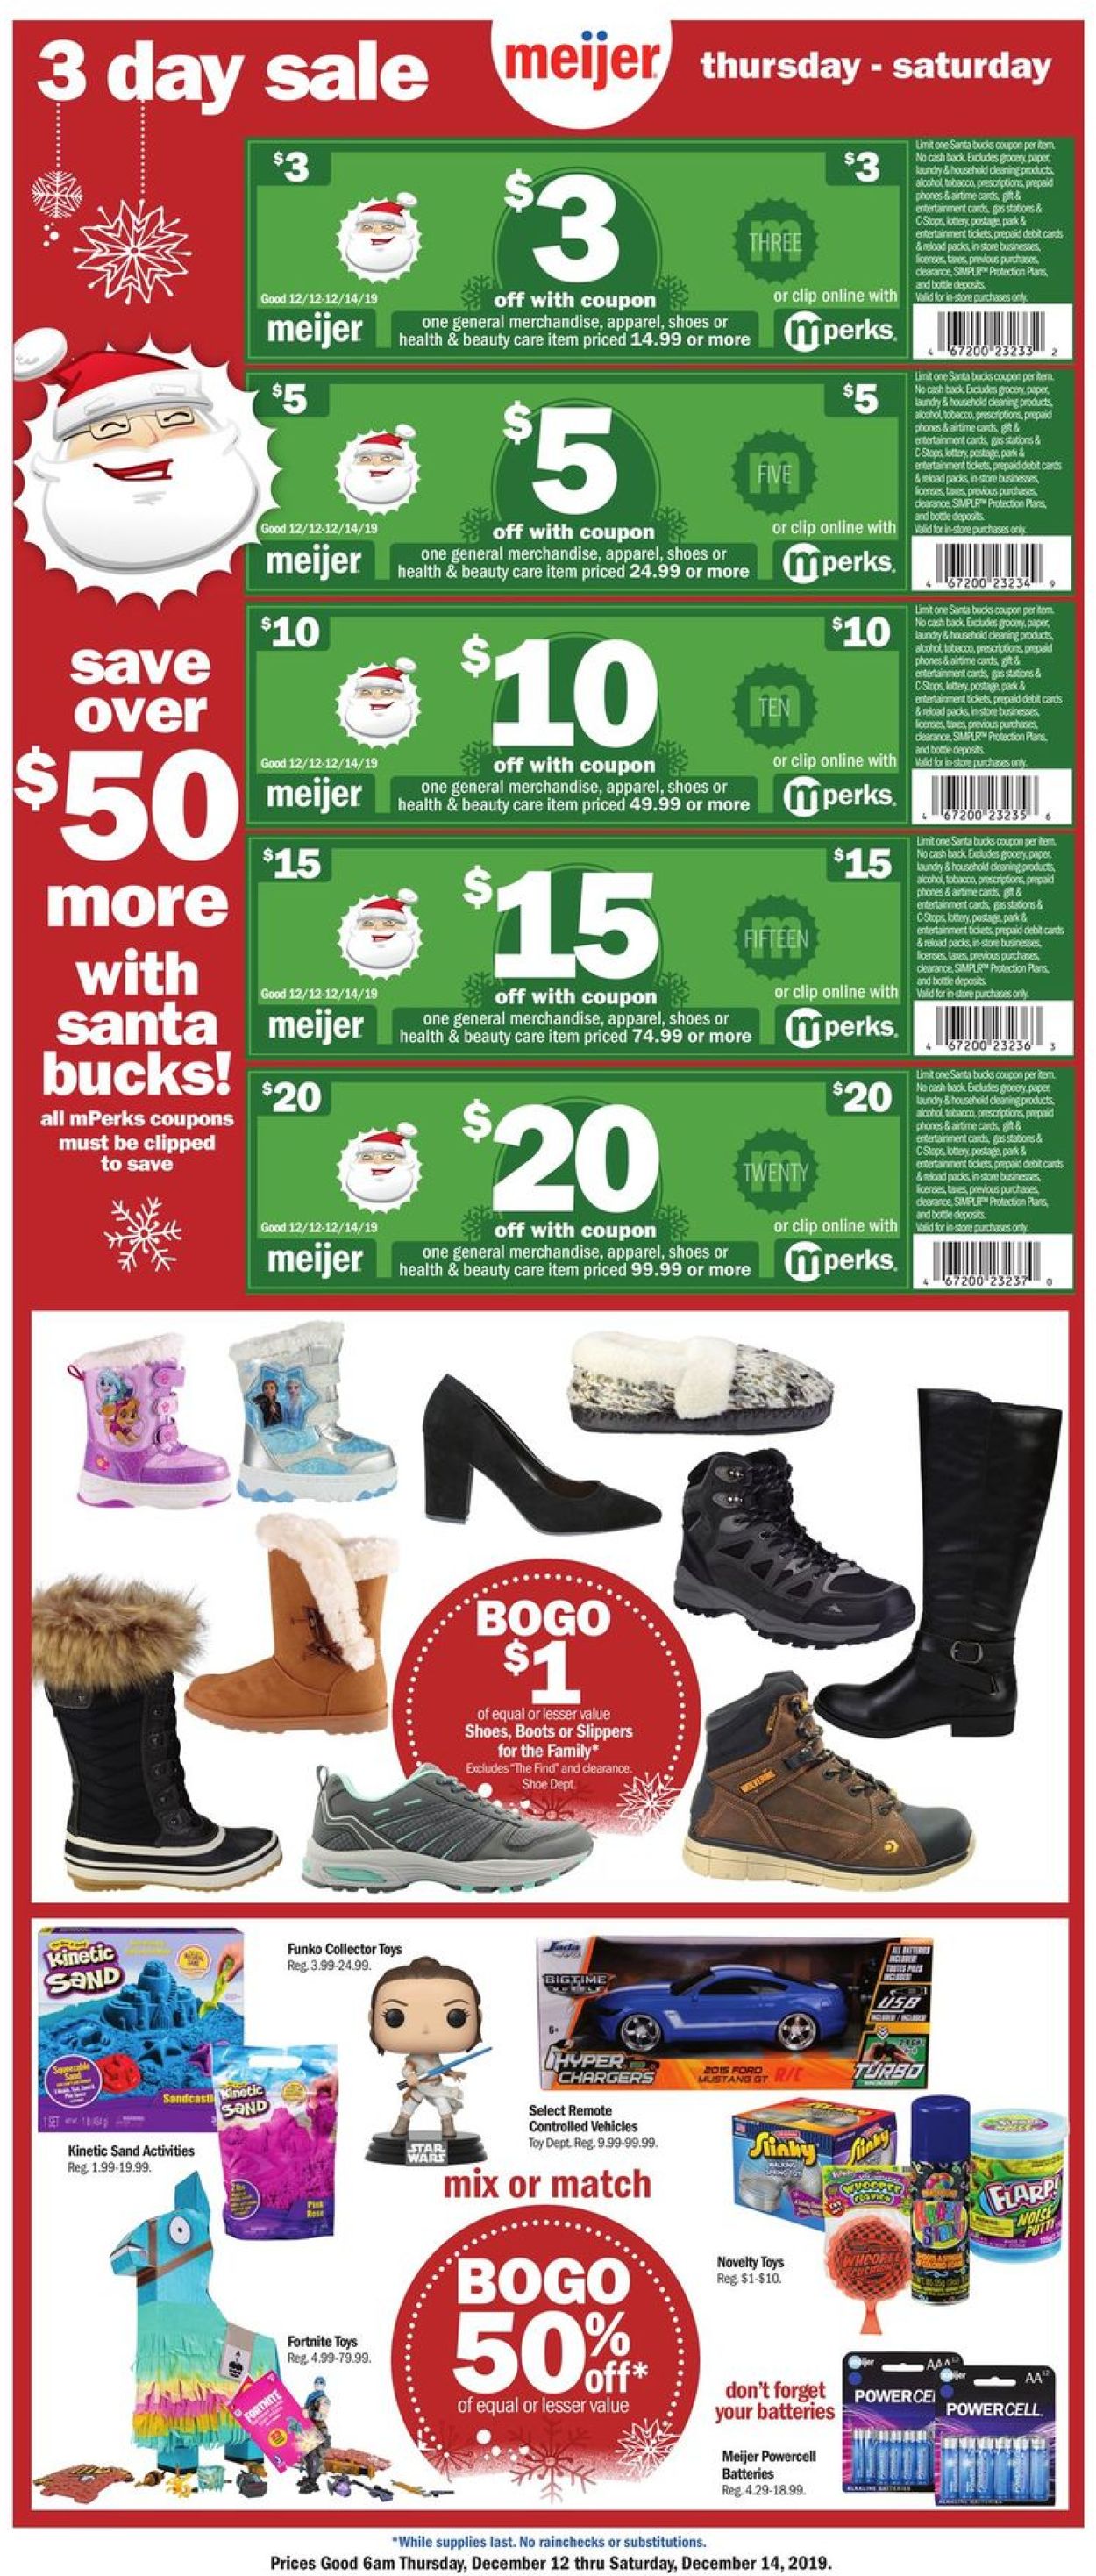 meijer buy one get one for $1 shoes 2019